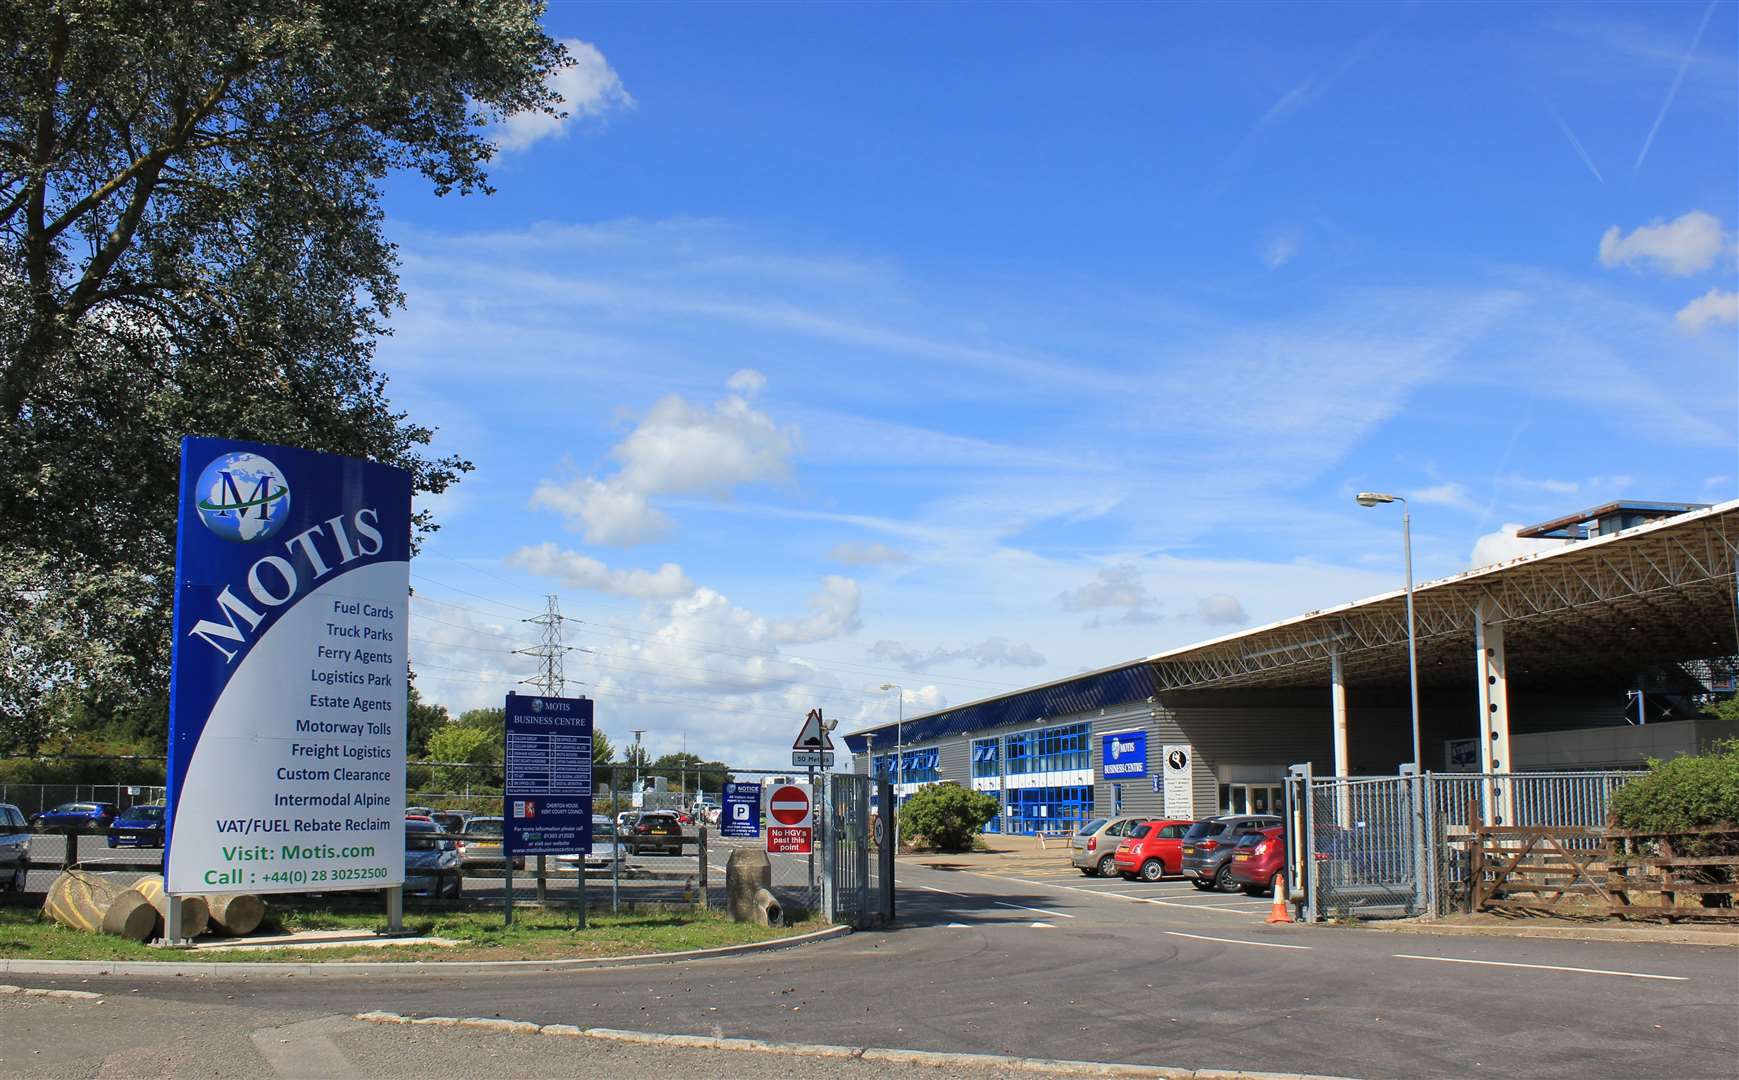 Plans have been submitted to expand the Motis Business Centre in Folkestone. All pictures: Motis